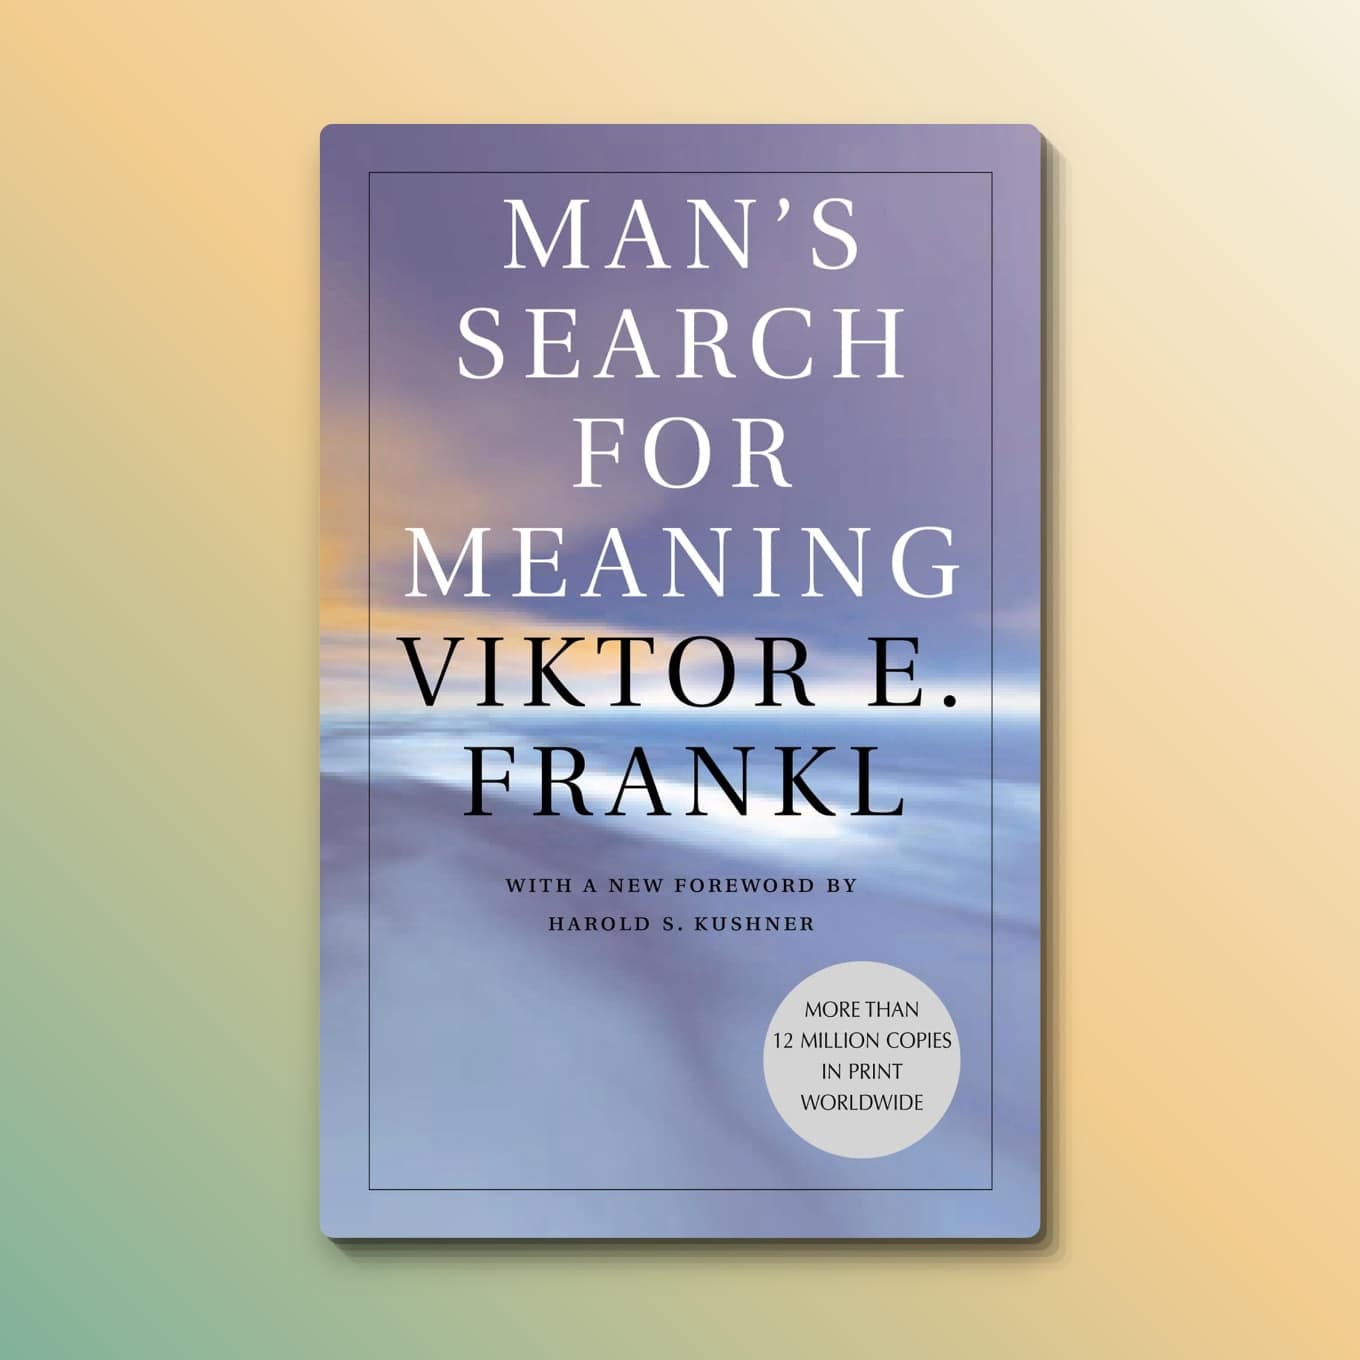 “Man’s Search for Meaning” by Viktor E. Frankl